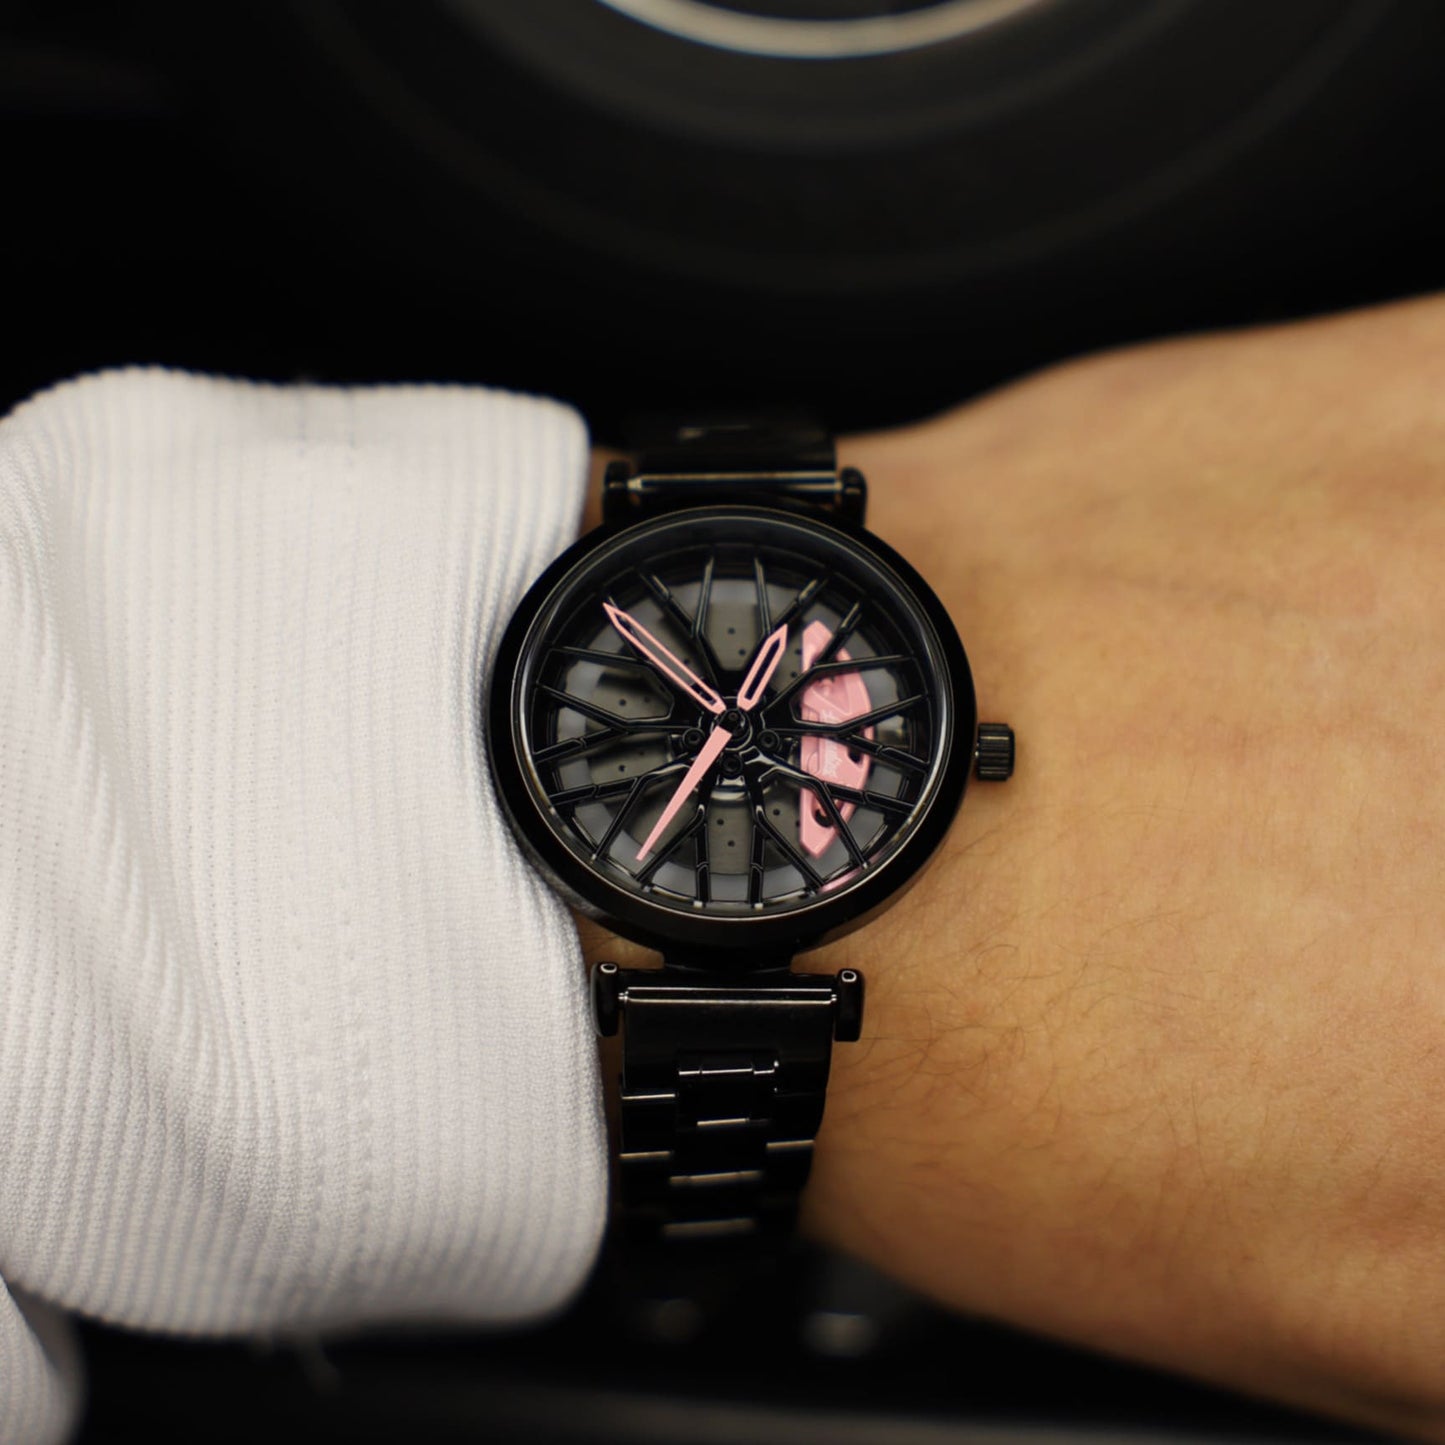 An image showcasing a DriftElement Lady Like Edition watch, a unique timepiece with a motorsport-inspired rim design. This innovative accessory from a young German startup features striking pink accents that contrast with the dark rim pattern, embodying a blend of sportiness and femininity.